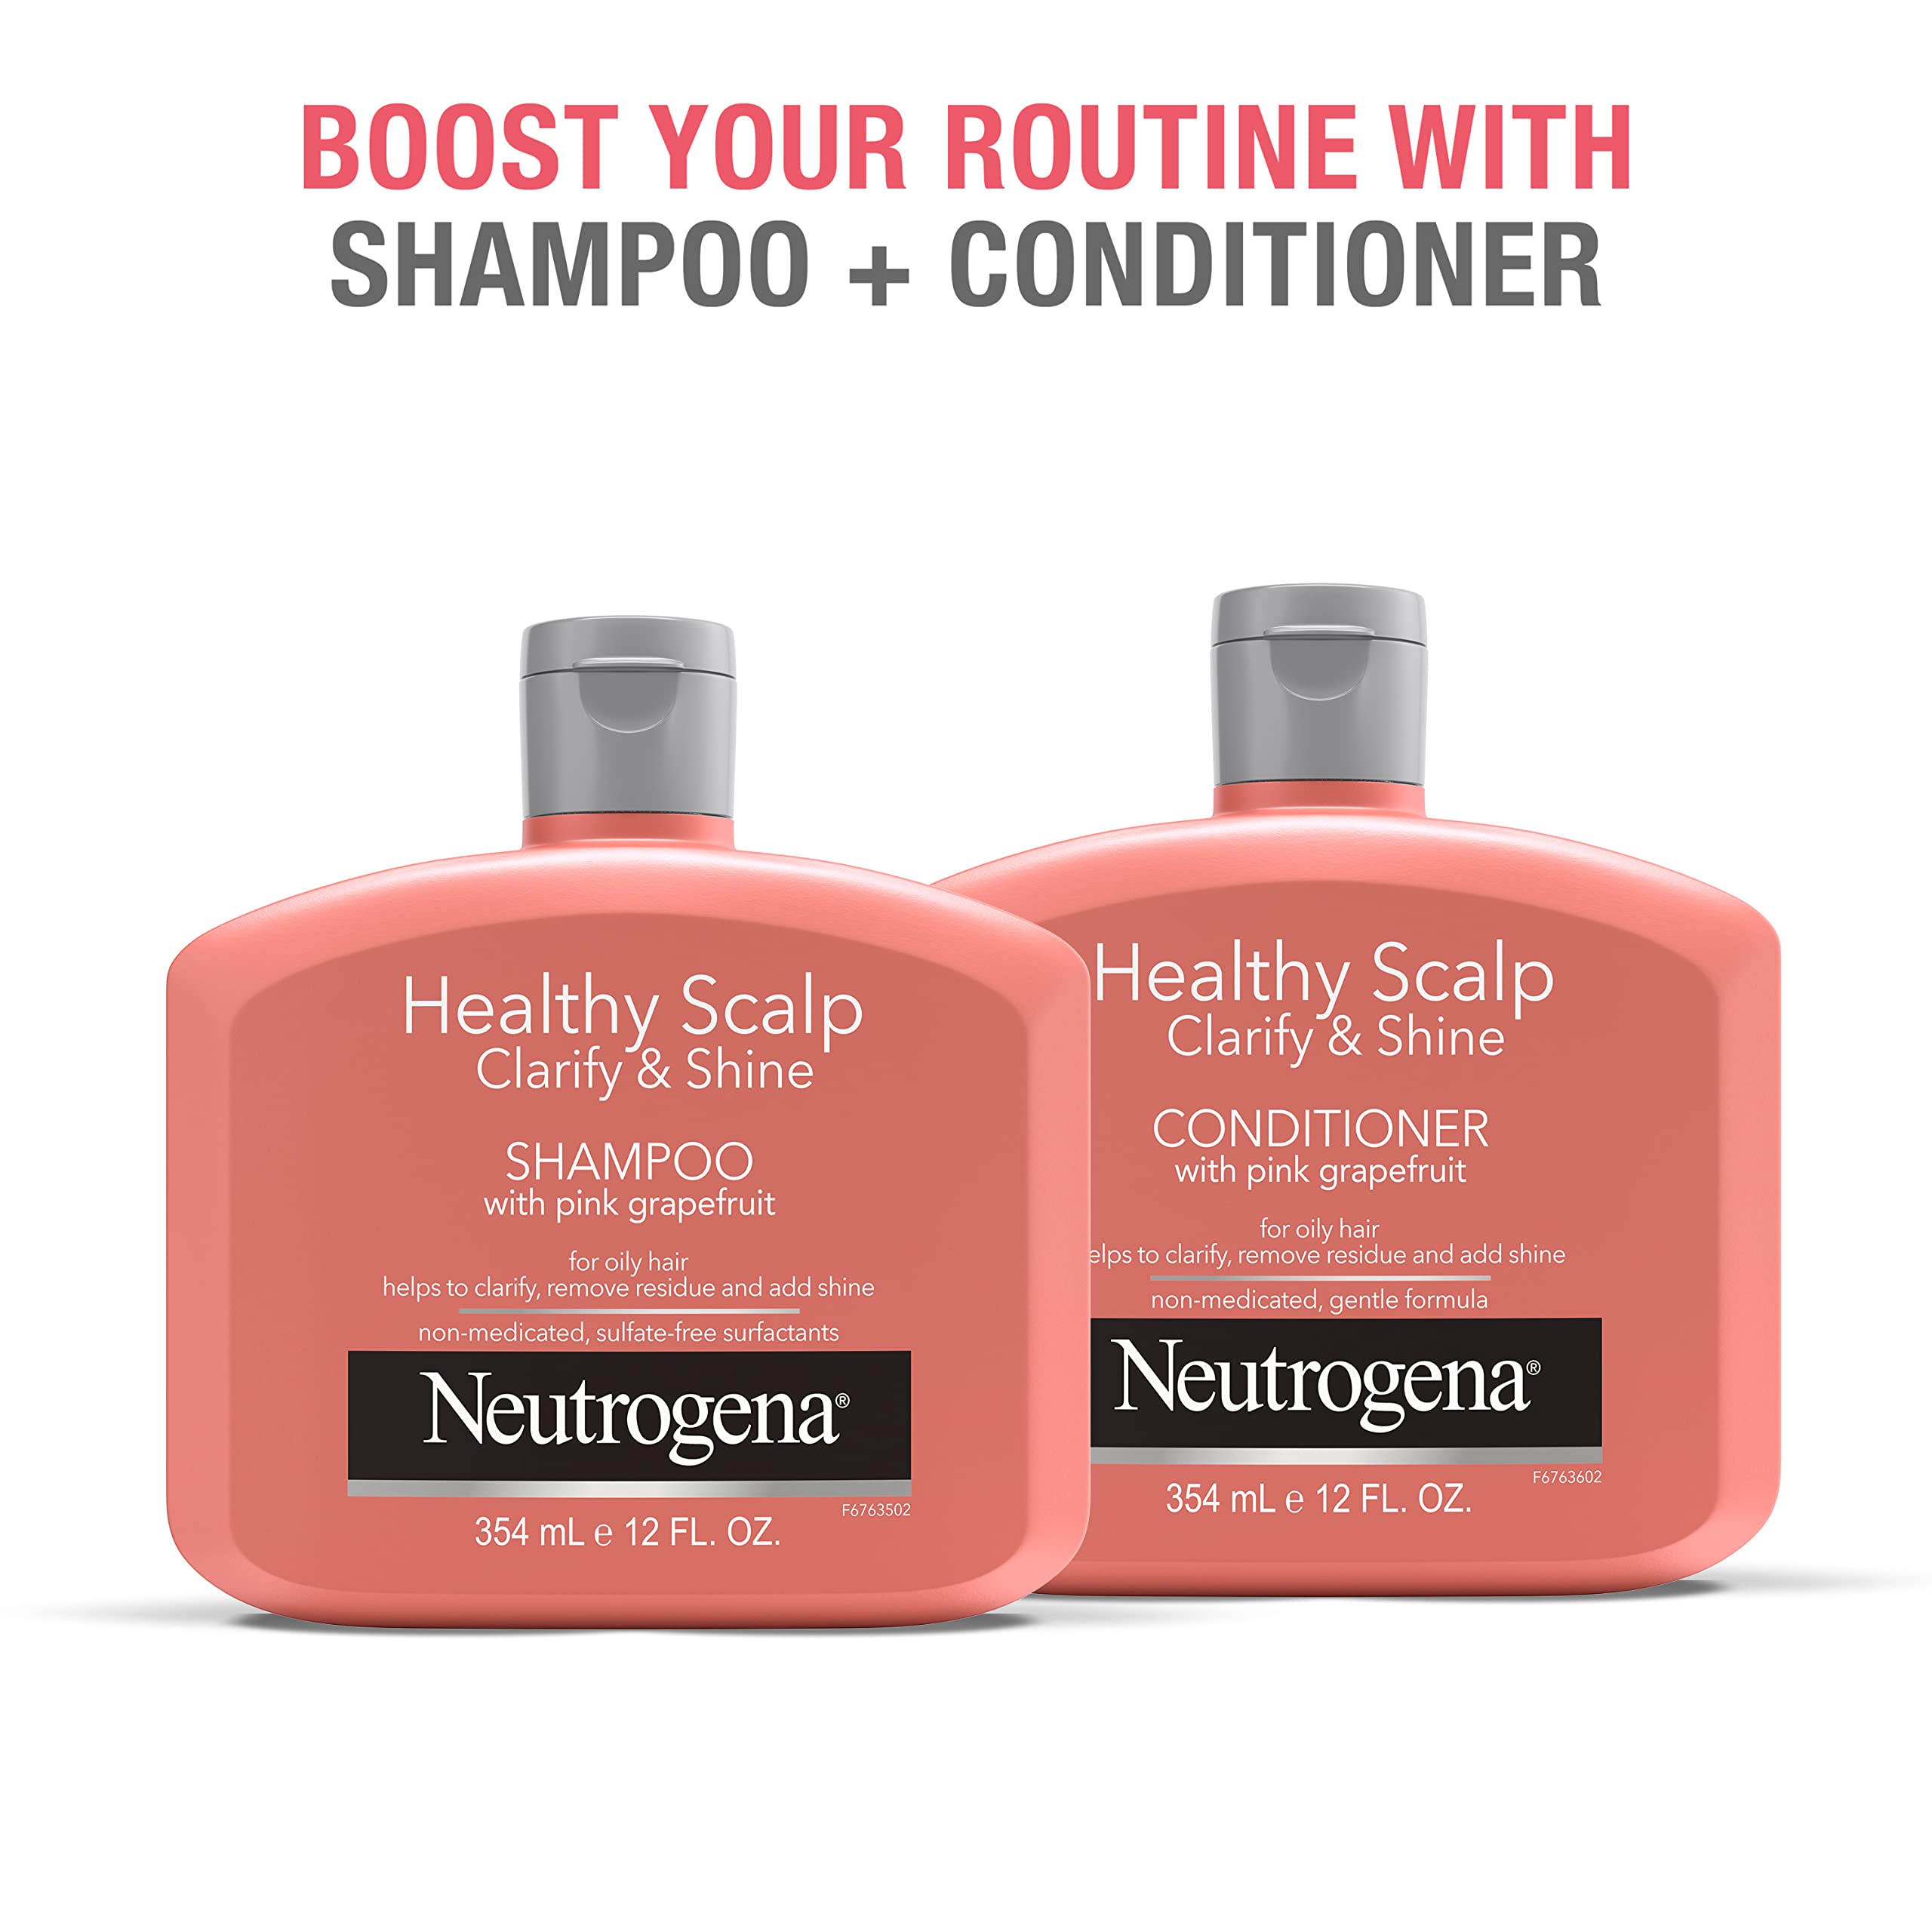 Neutrogena Exfoliating Healthy Scalp Clarify & Shine Conditioner for Oily Hair and Scalp, Anti-Residue Conditioner with Pink Grapefruit, Paraben & Phthalate-Free, Color-Safe, 12oz